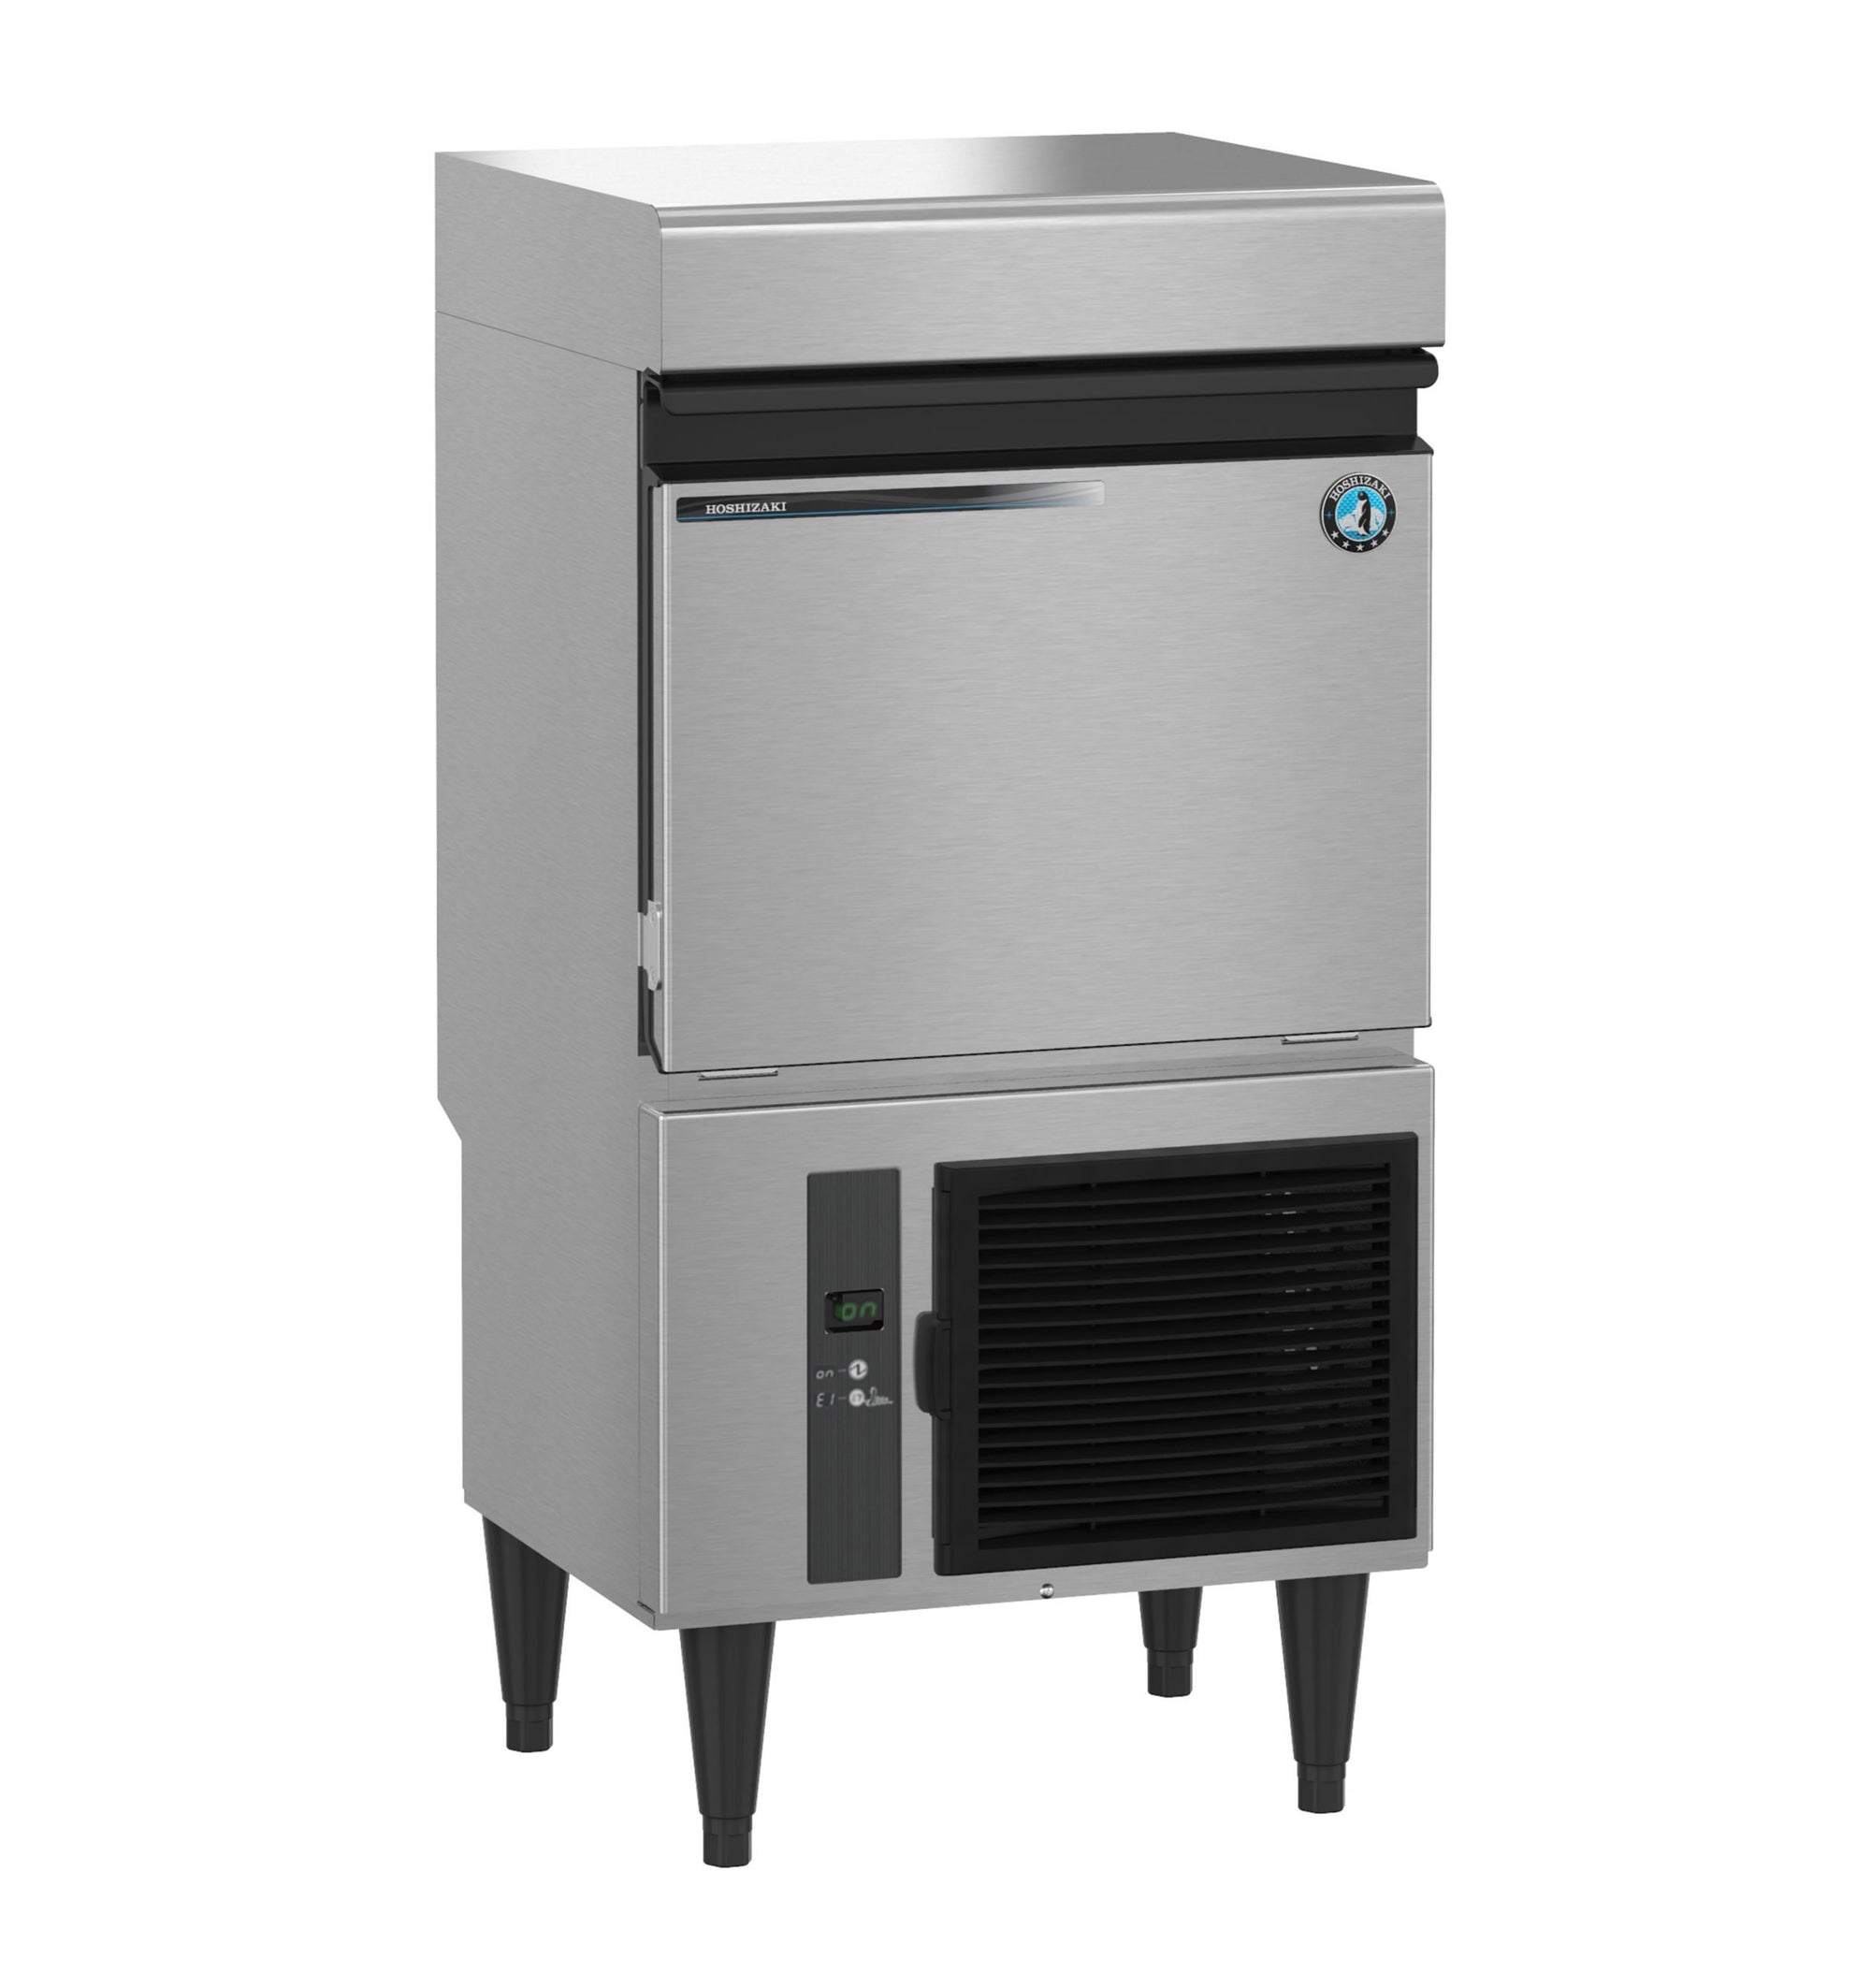 Hoshizaki IM-50BAA-LM | Large 2" Square Cube Icemaker, Air-cooled, 22 lbs capacity